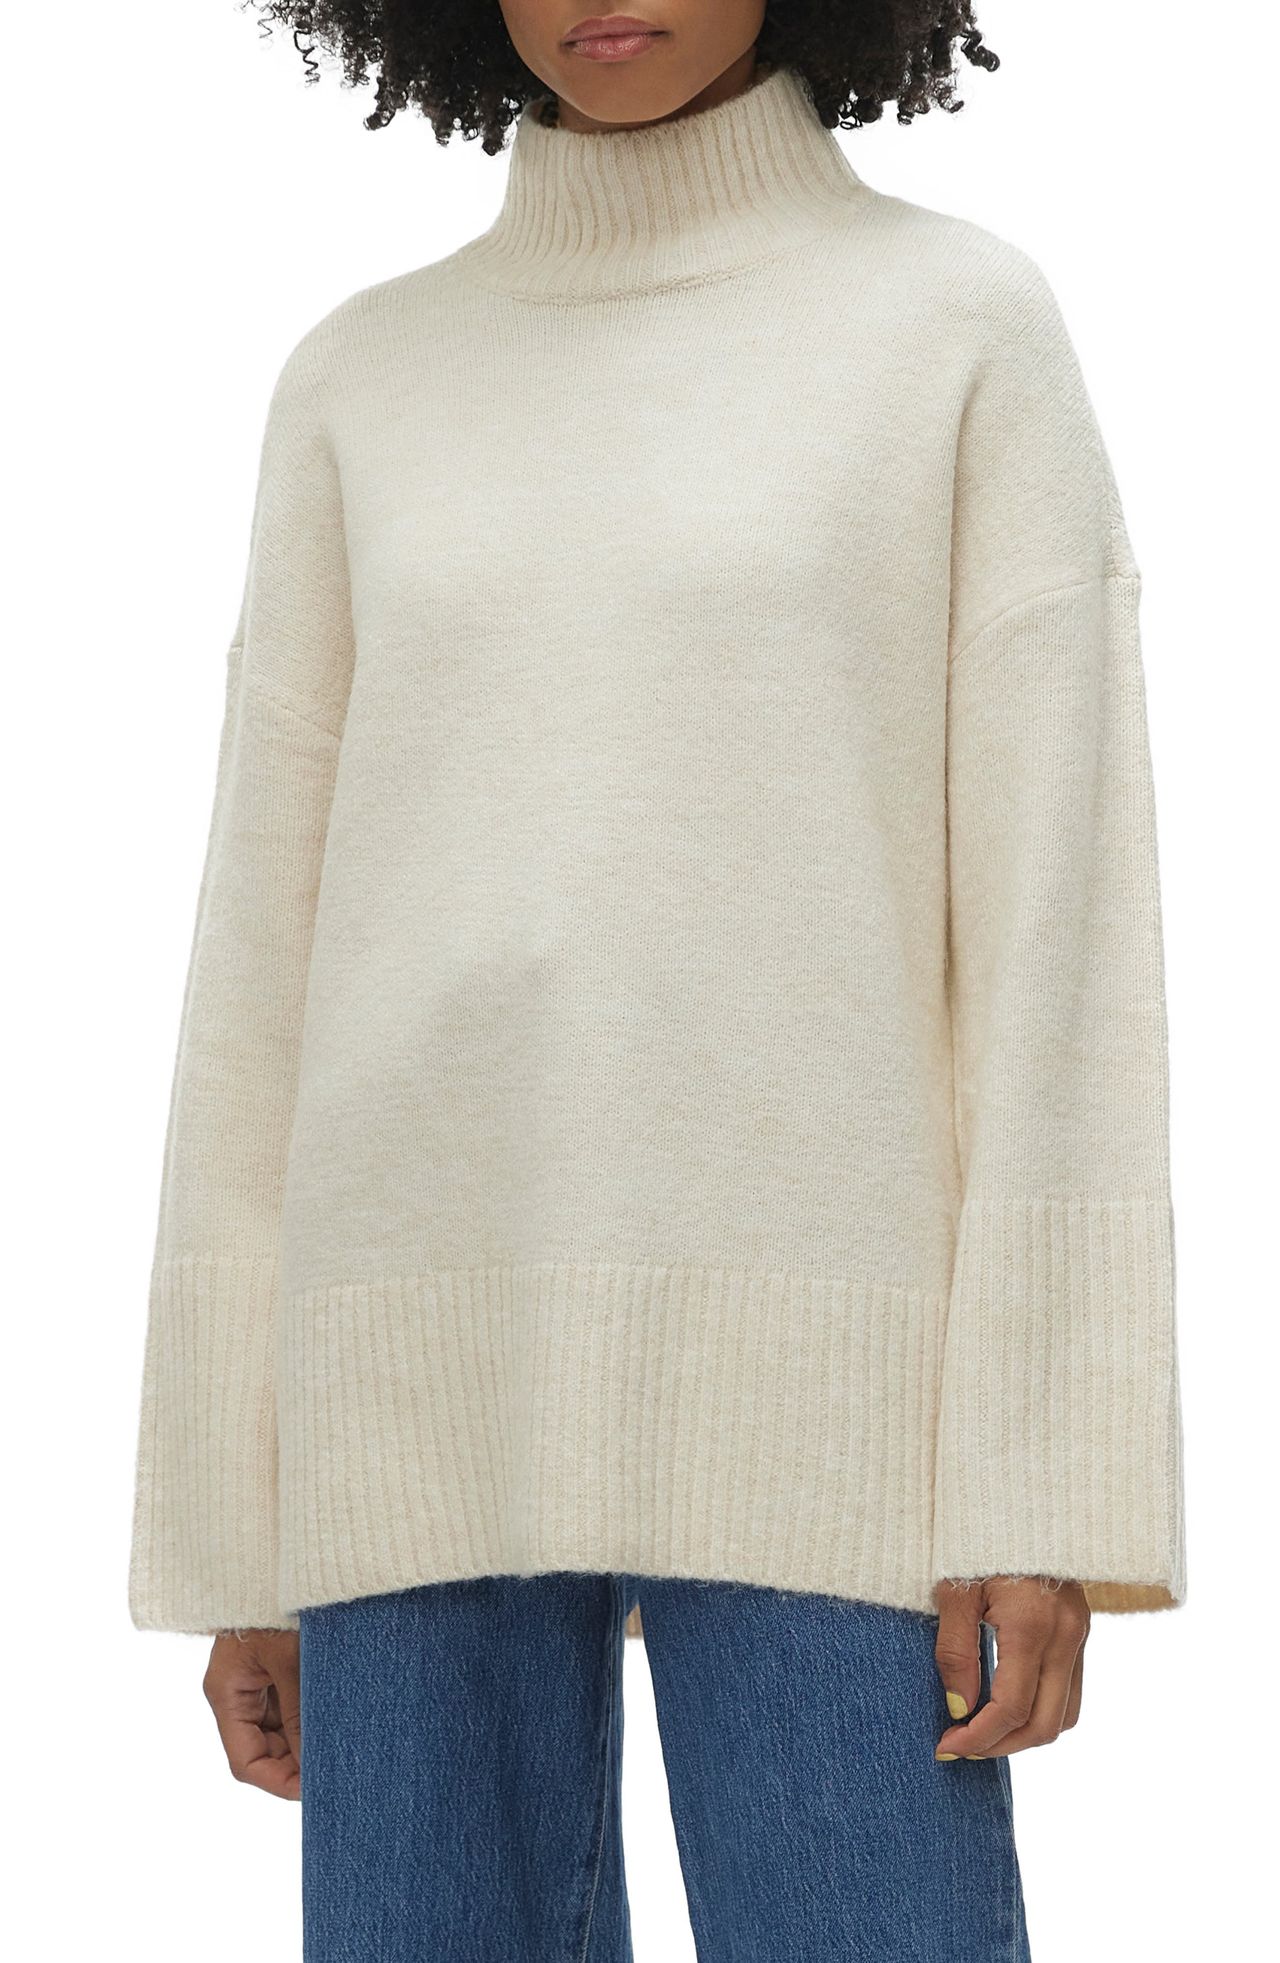 7 Chic Winter Basics to Buy at Nordstrom Right Now | Who What Wear